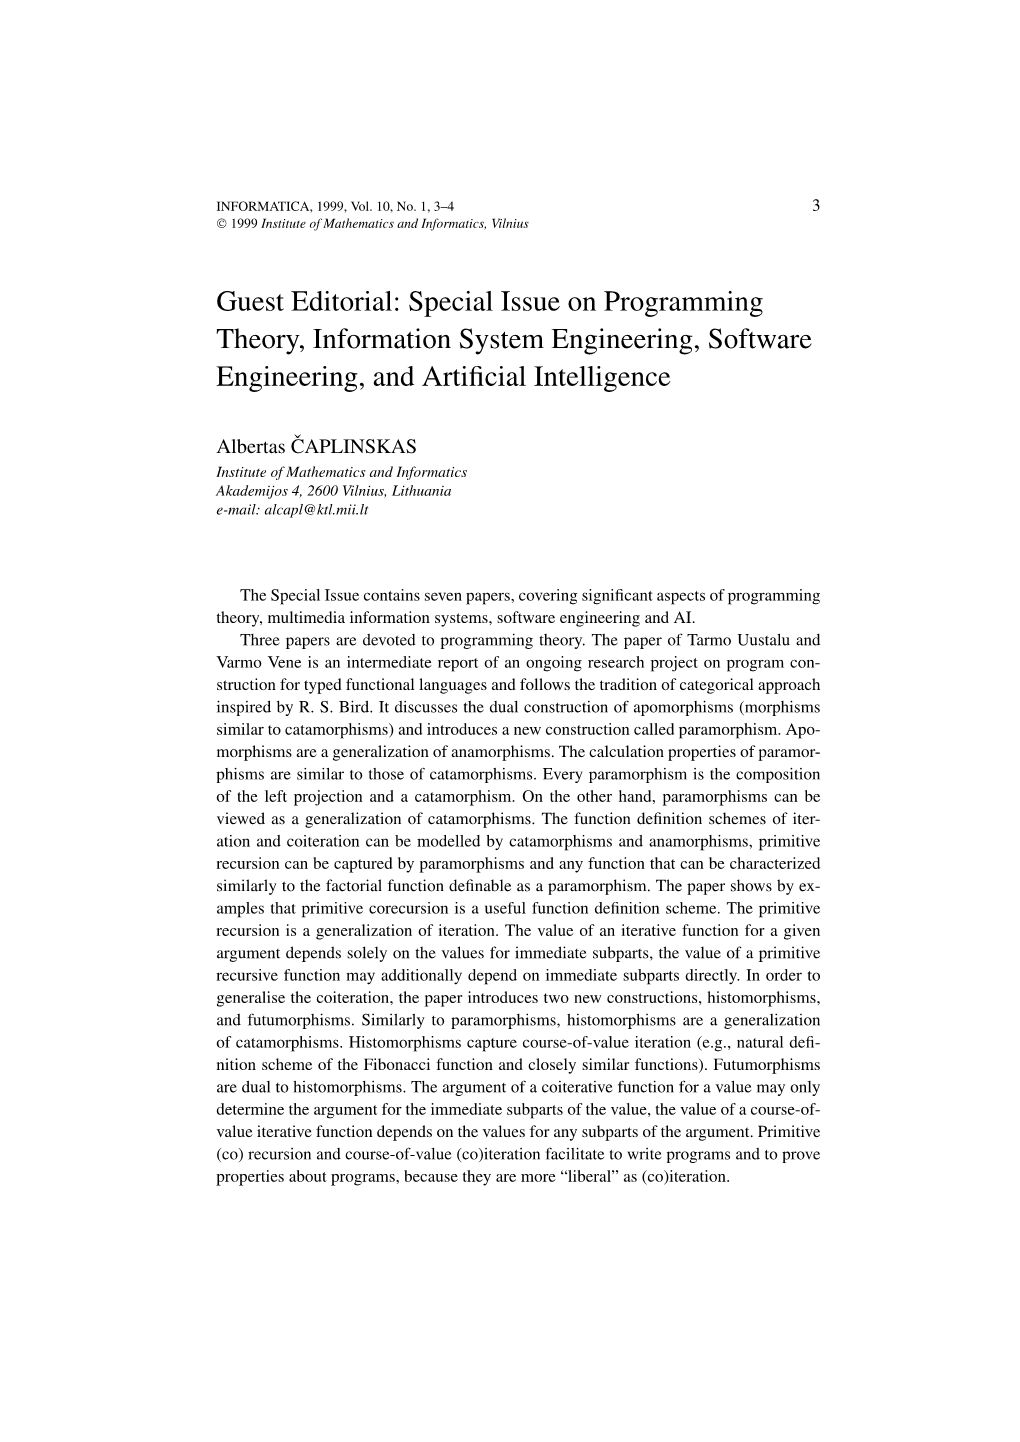 Special Issue on Programming Theory, Information System Engineering, Software Engineering, and Artiﬁcial Intelligence